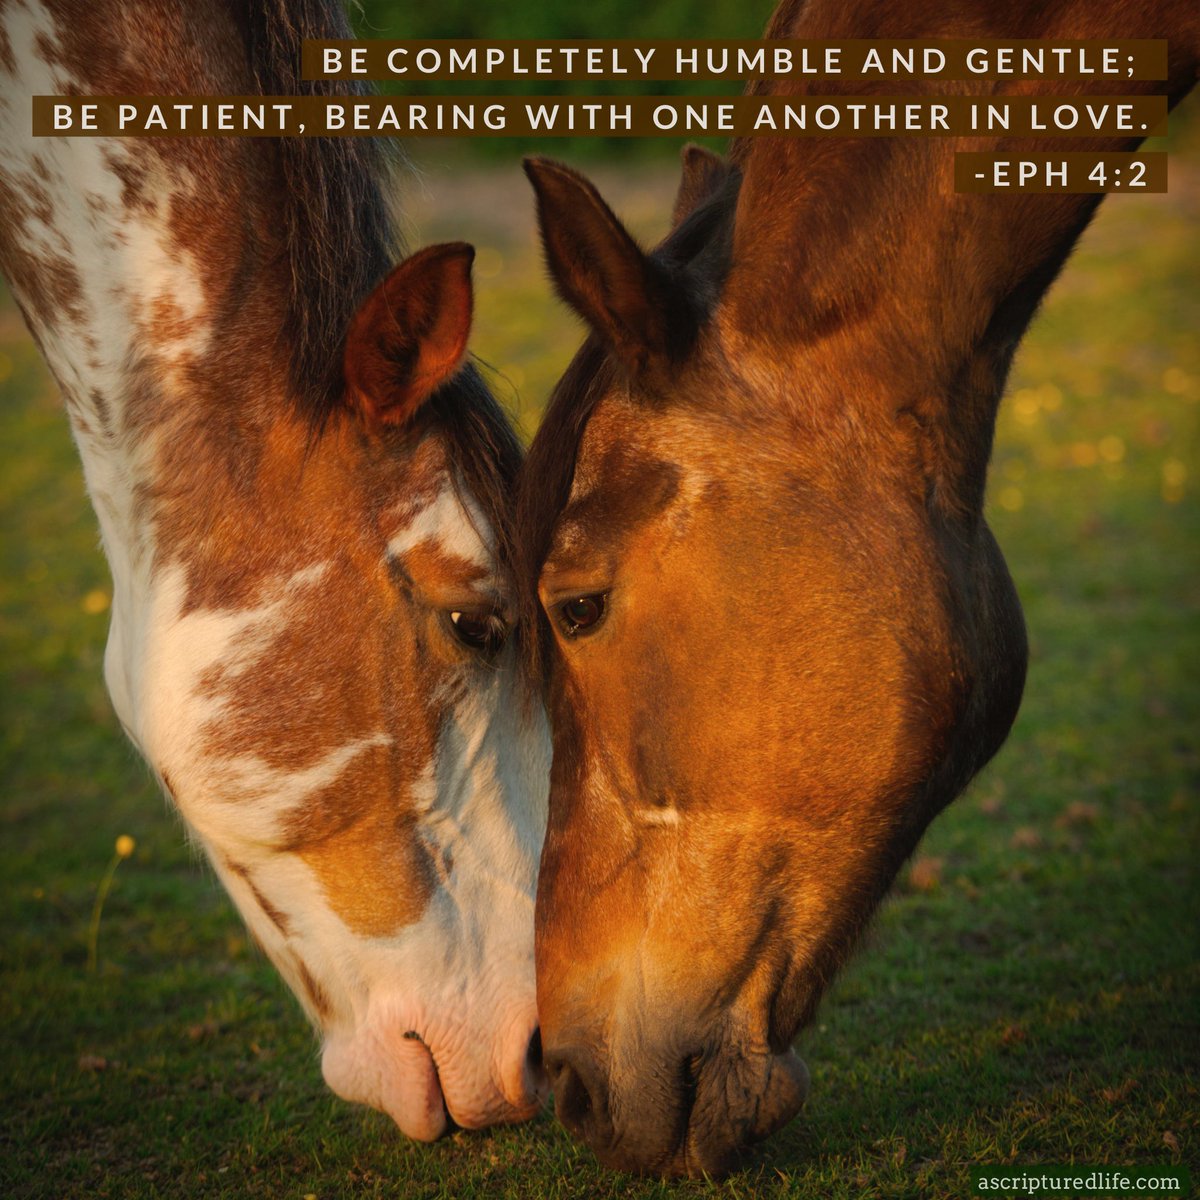 Be completely humble and gentle; be patient, bearing with one another in love. Eph 4:2